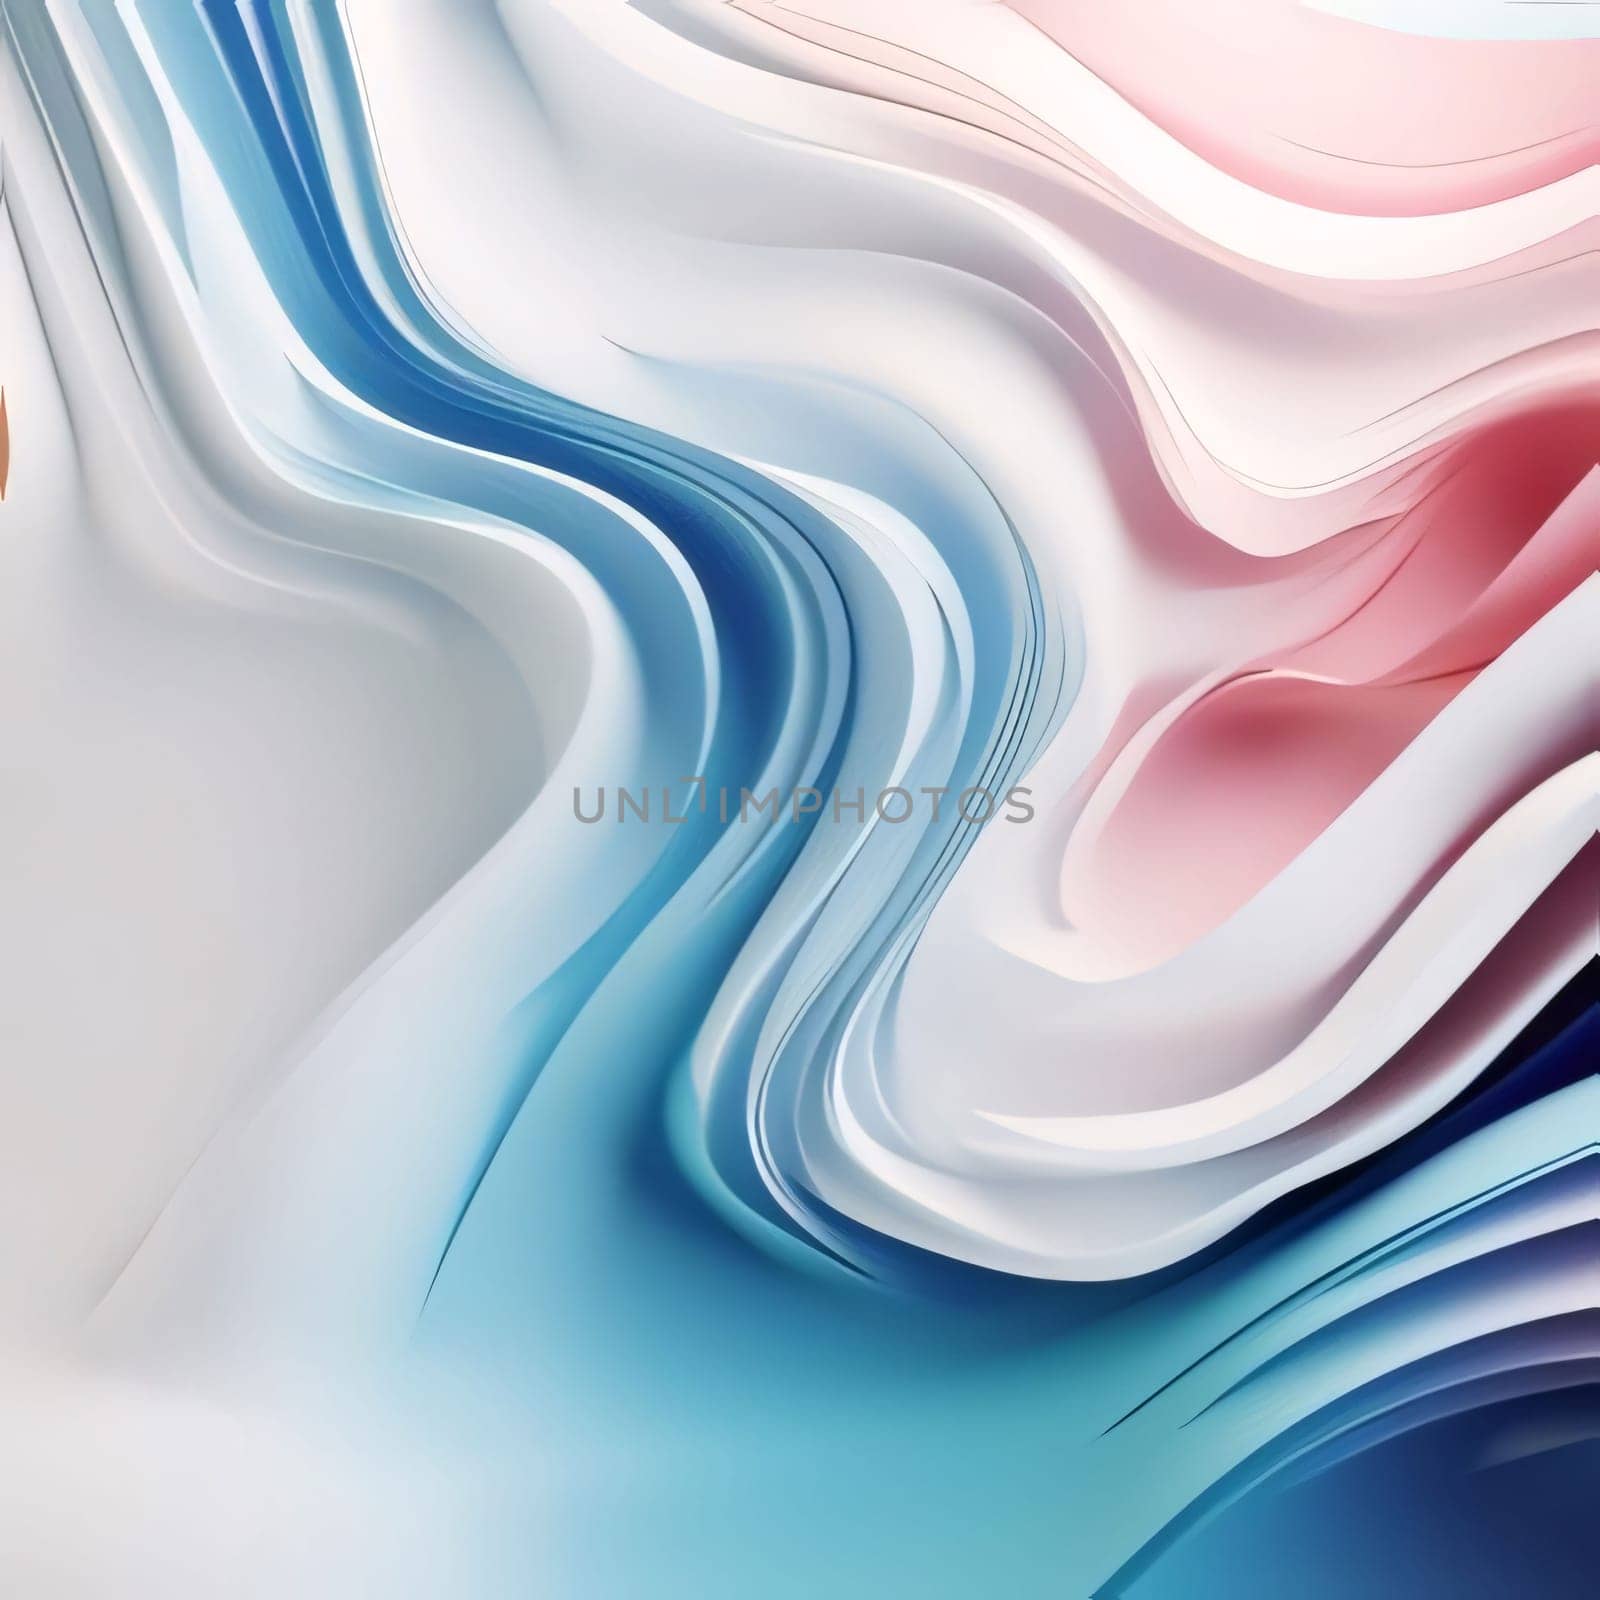 Abstract background design: abstract colorful background with smooth lines in blue, pink and white colors